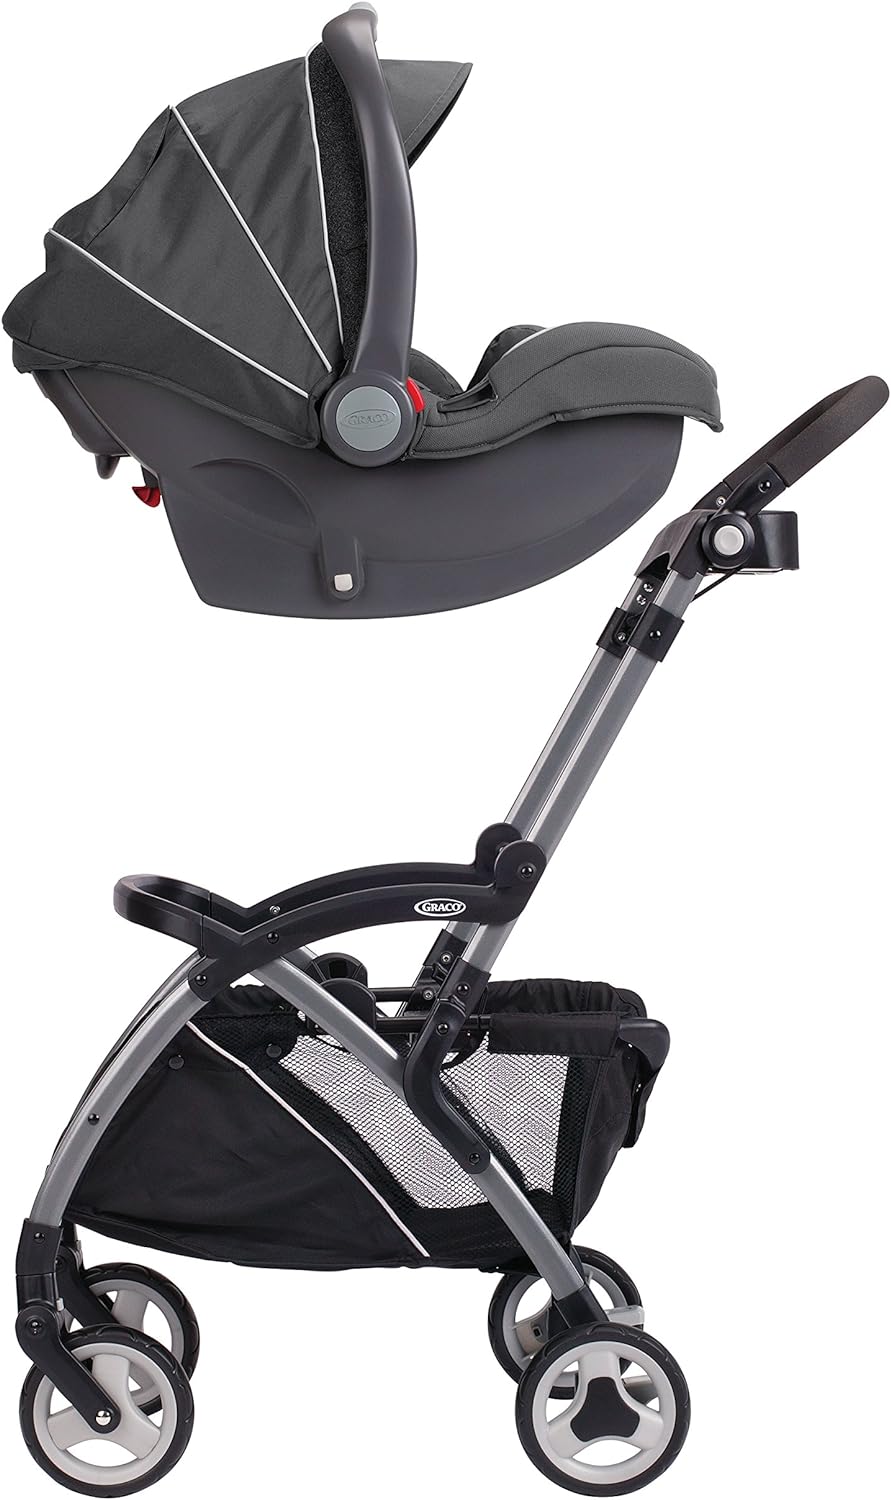 Graco SnugRider Elite Car Seat Carrier, Lightweight Frame, Travel Stroller Accepts any Graco SnugRide Infant Car Seat, Black - Graco SnugRider Elite Car Seat Carrier Review